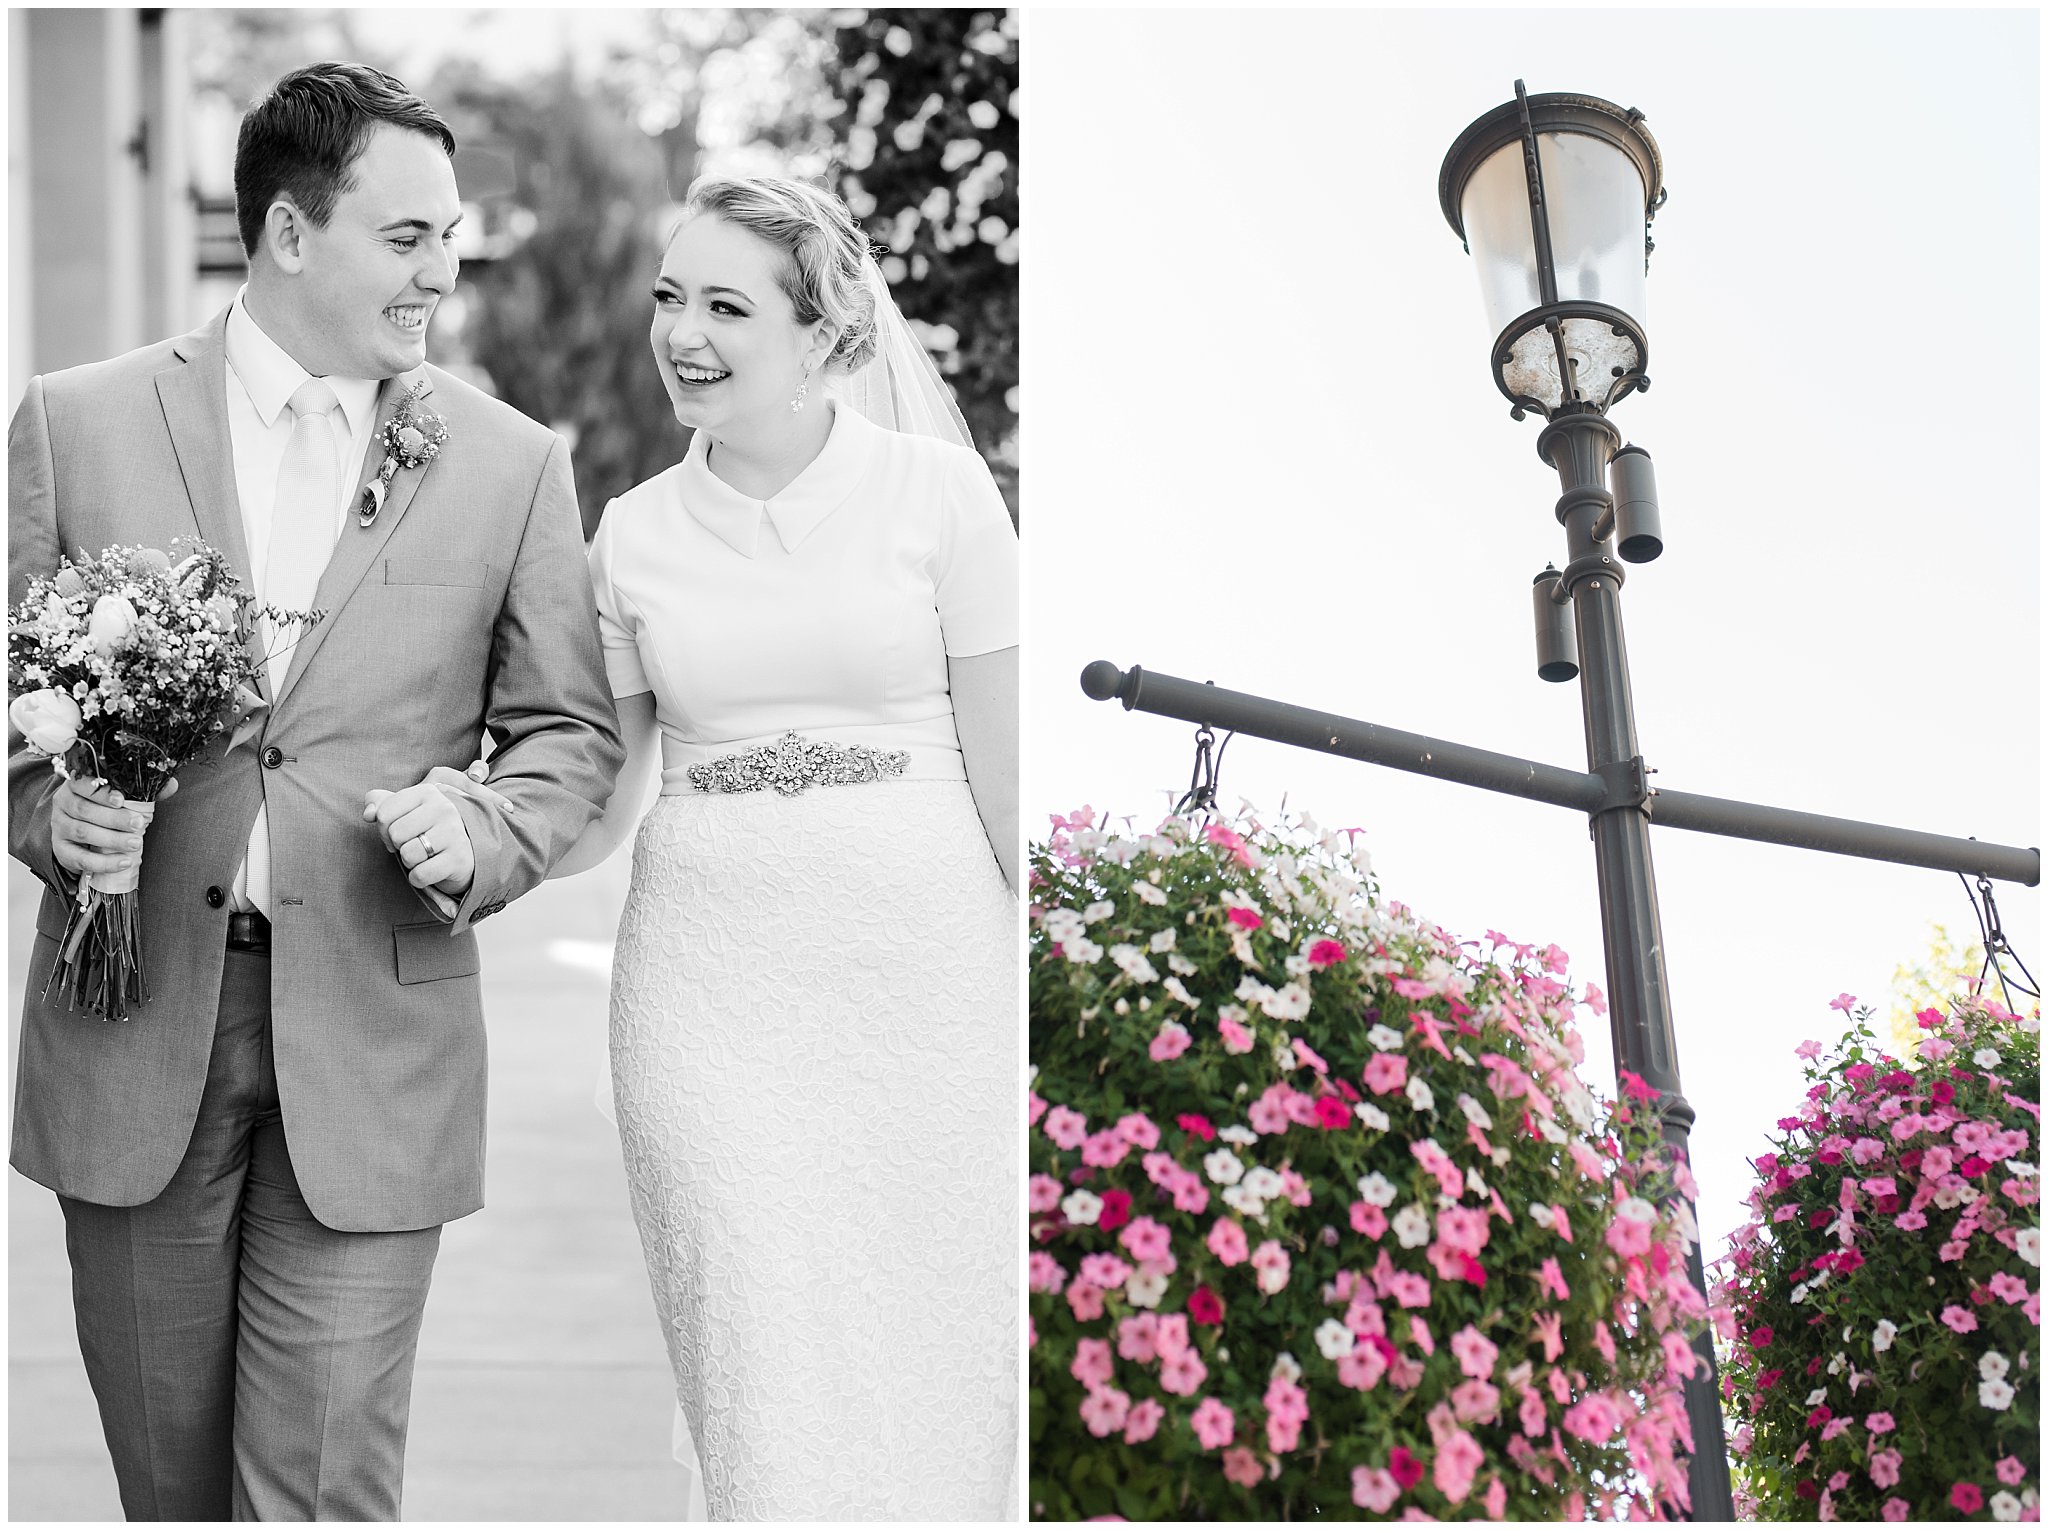 Bride and groom vintage themed wedding at Fountain View Event Venue at Farmington Station | Fountain View Event Venue and Bountiful Temple Wedding | Jessie and Dallin Photography